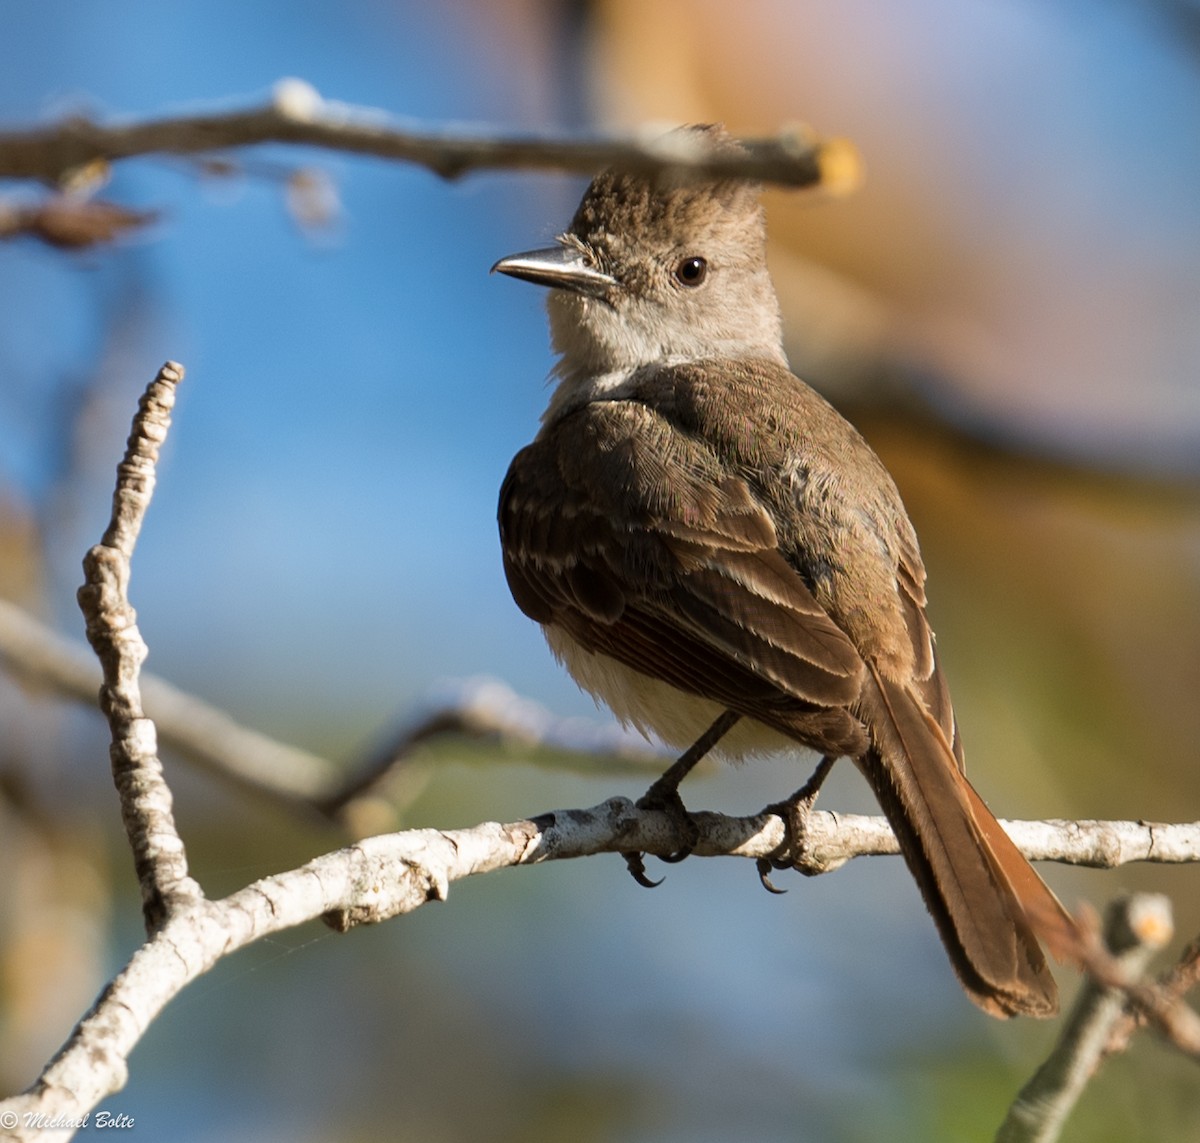 Ash-throated Flycatcher - Michael Bolte